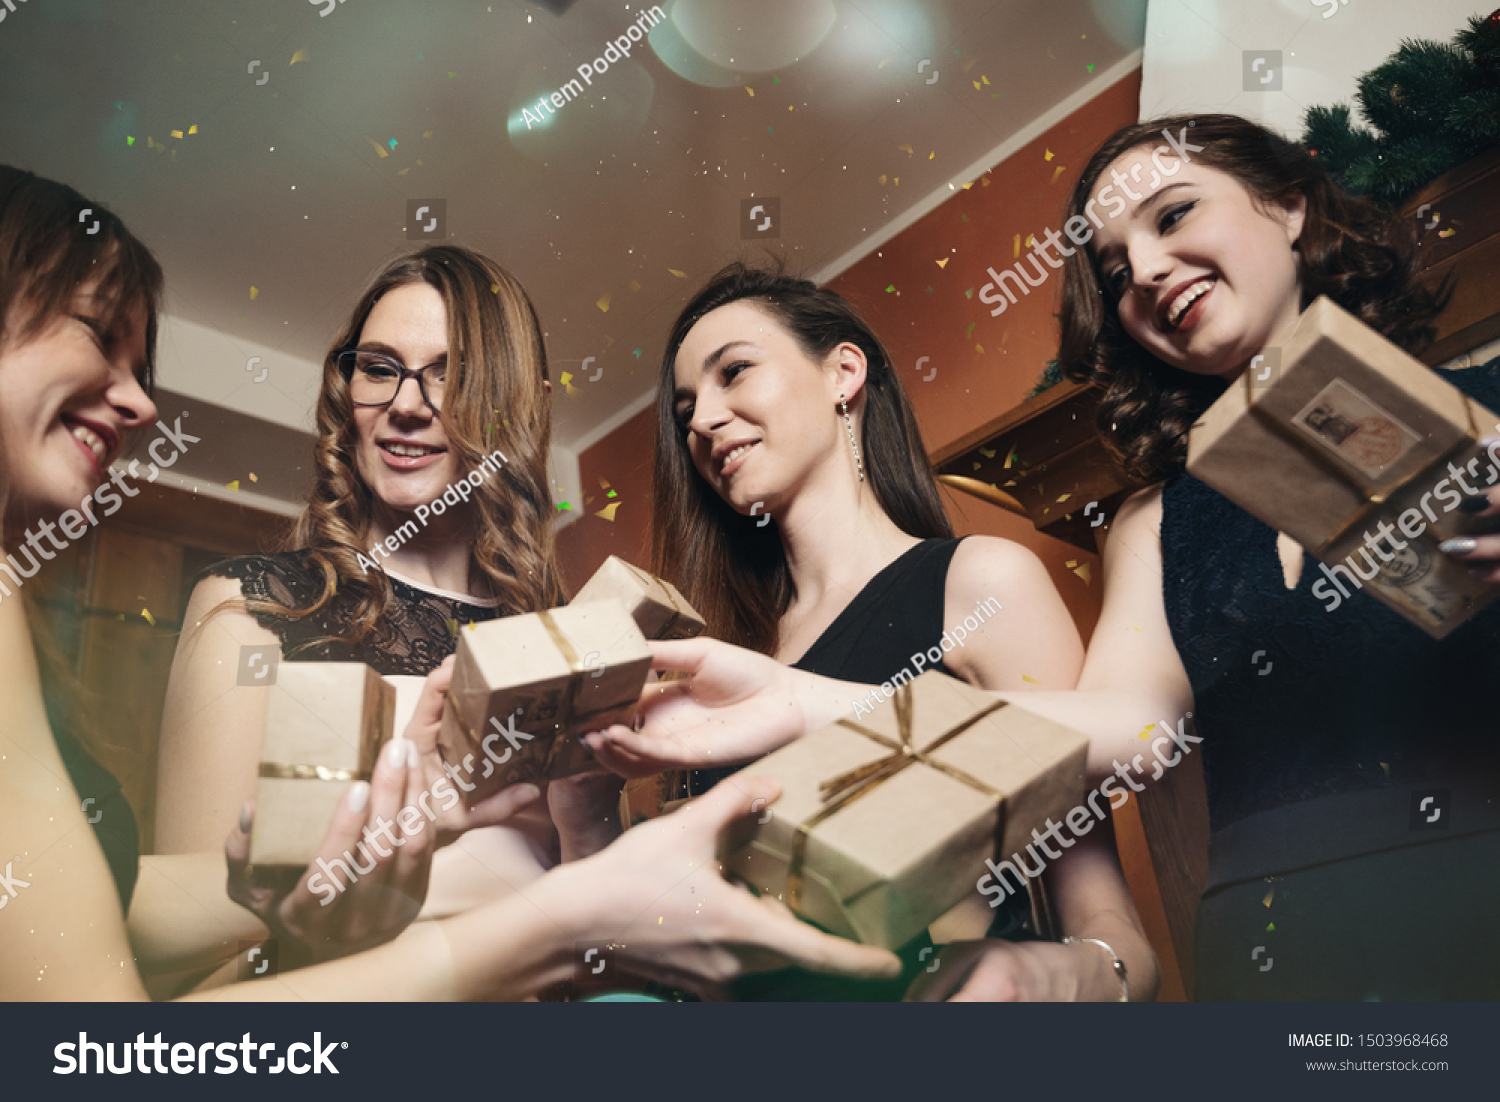 Four girlfriends celebrate New Year or Christmas by the fireplace. Laugh and give gifts to each other #1503968468